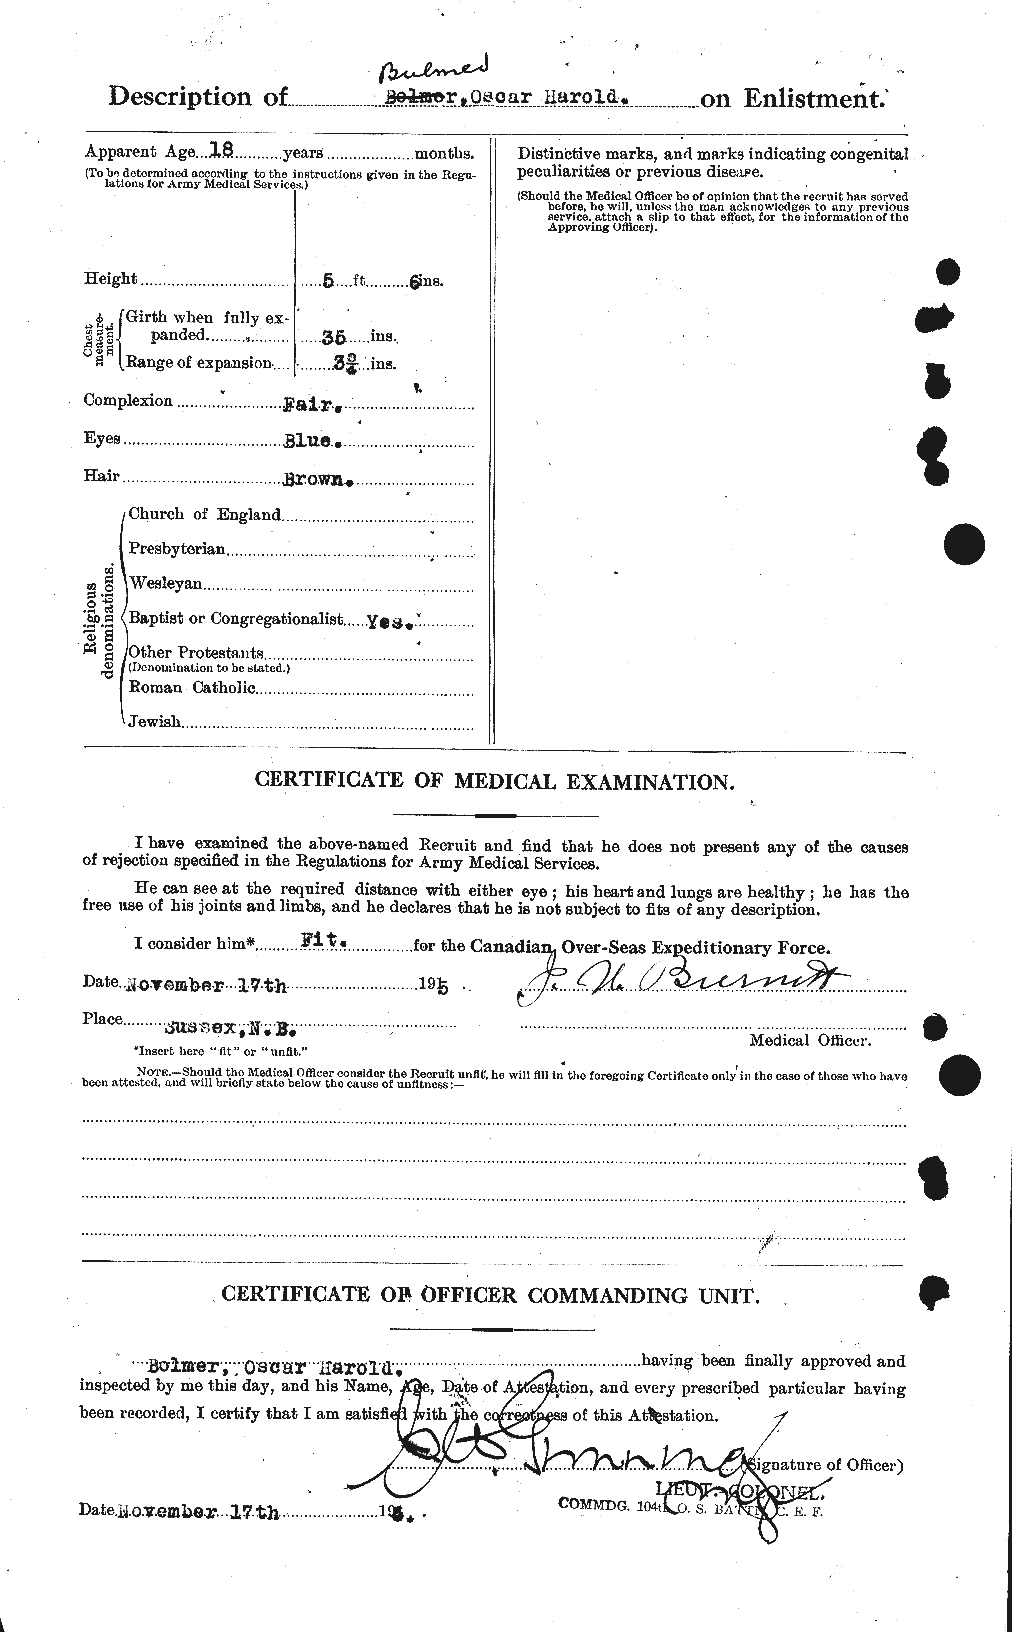 Personnel Records of the First World War - CEF 269835b